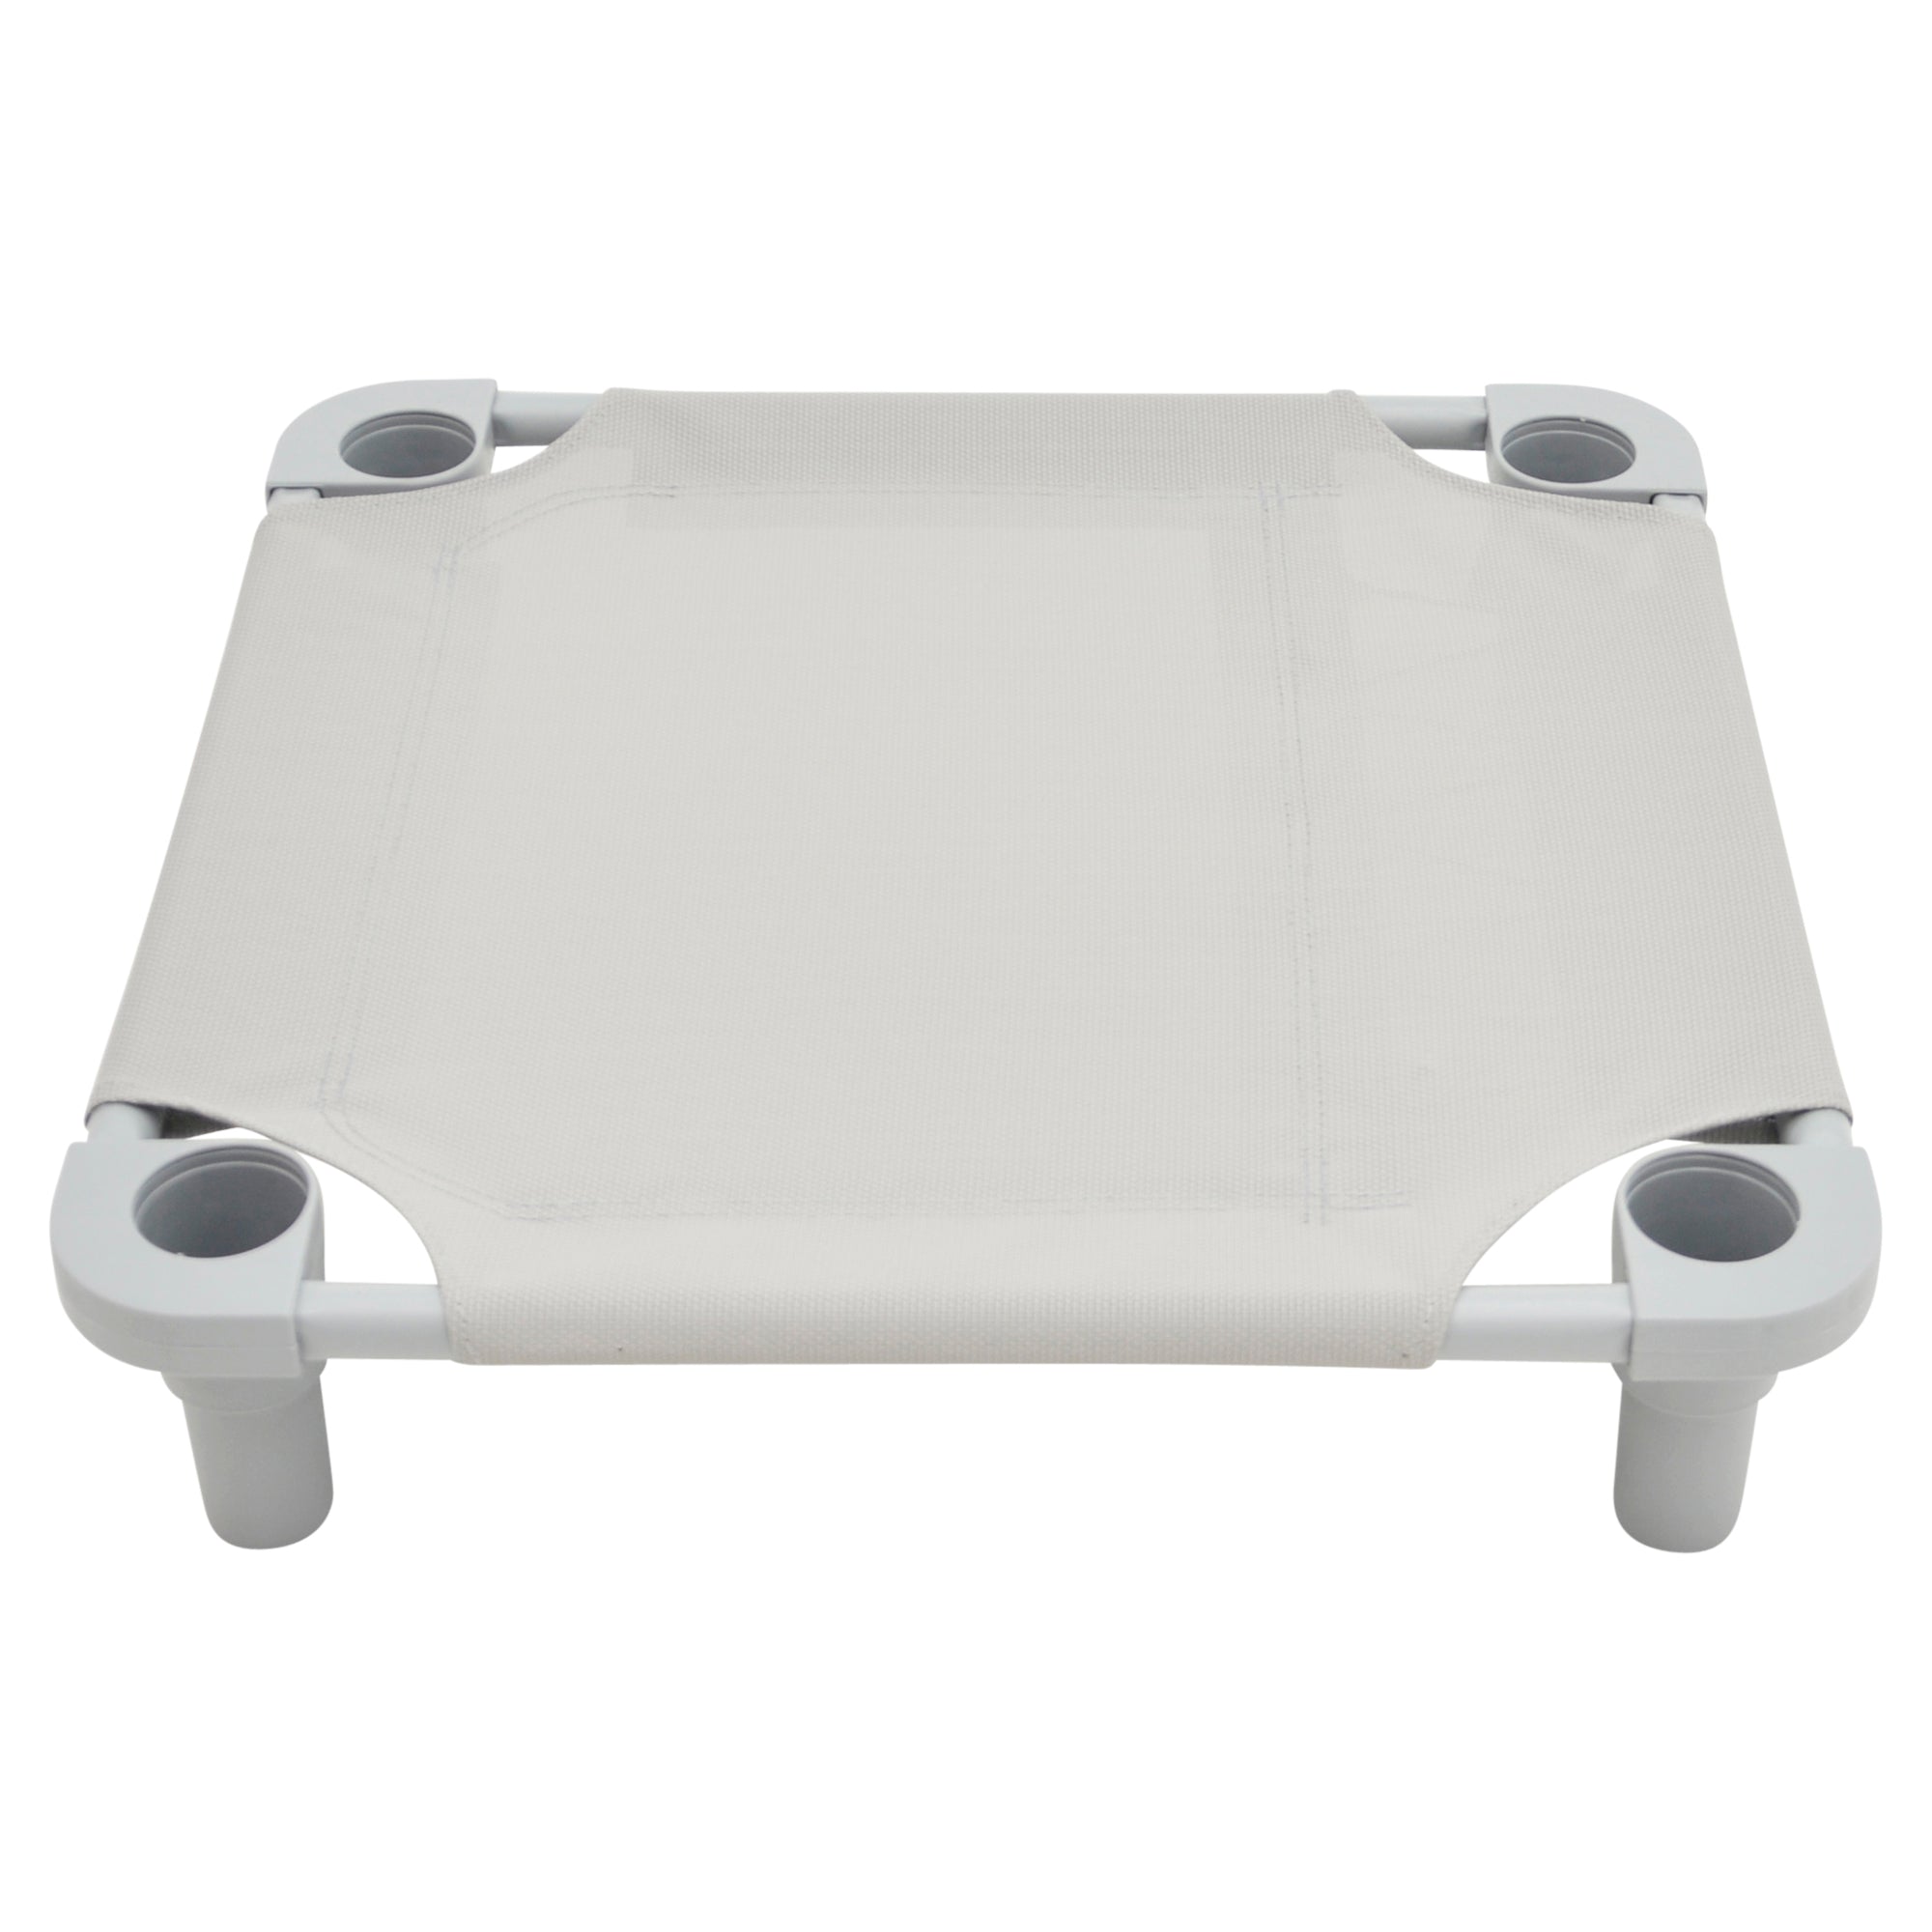 Build a Cot™ Customizable Place Bed